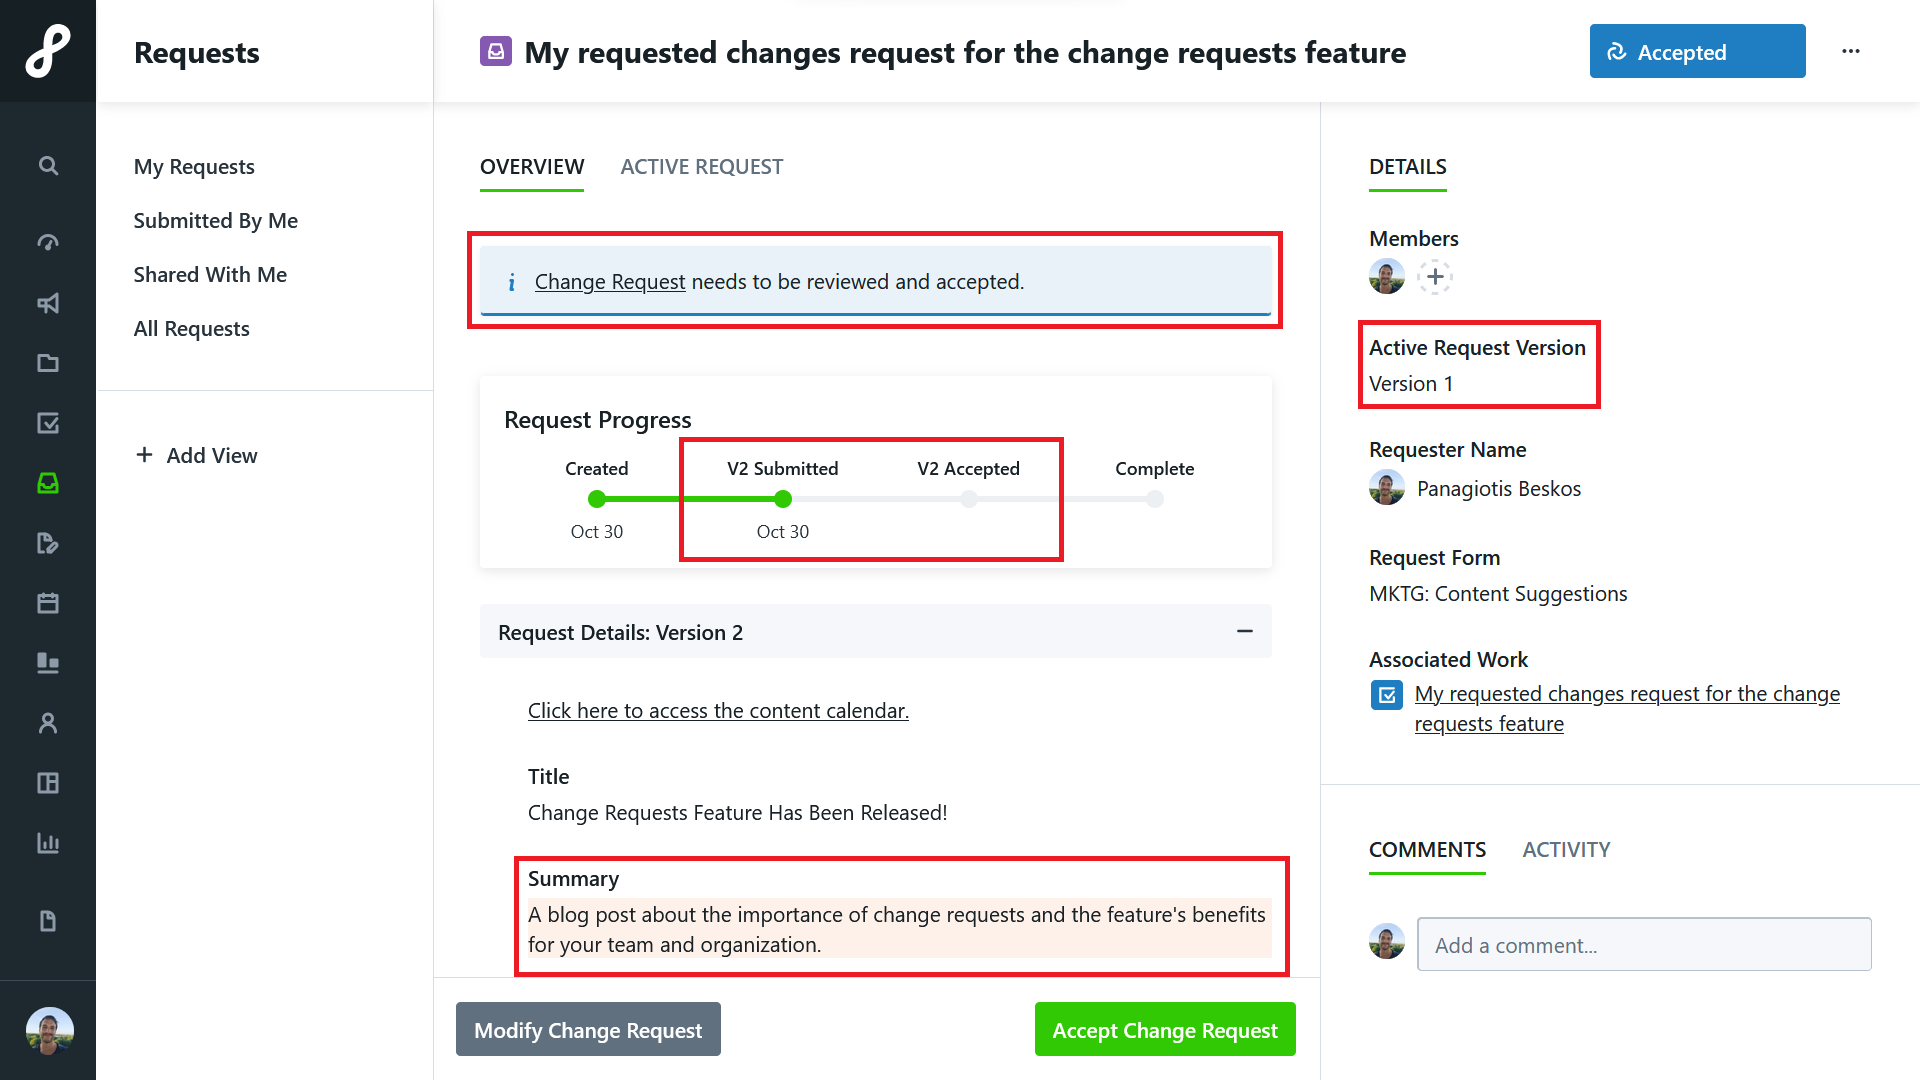 4. Change Requests Feature Change Request Saved